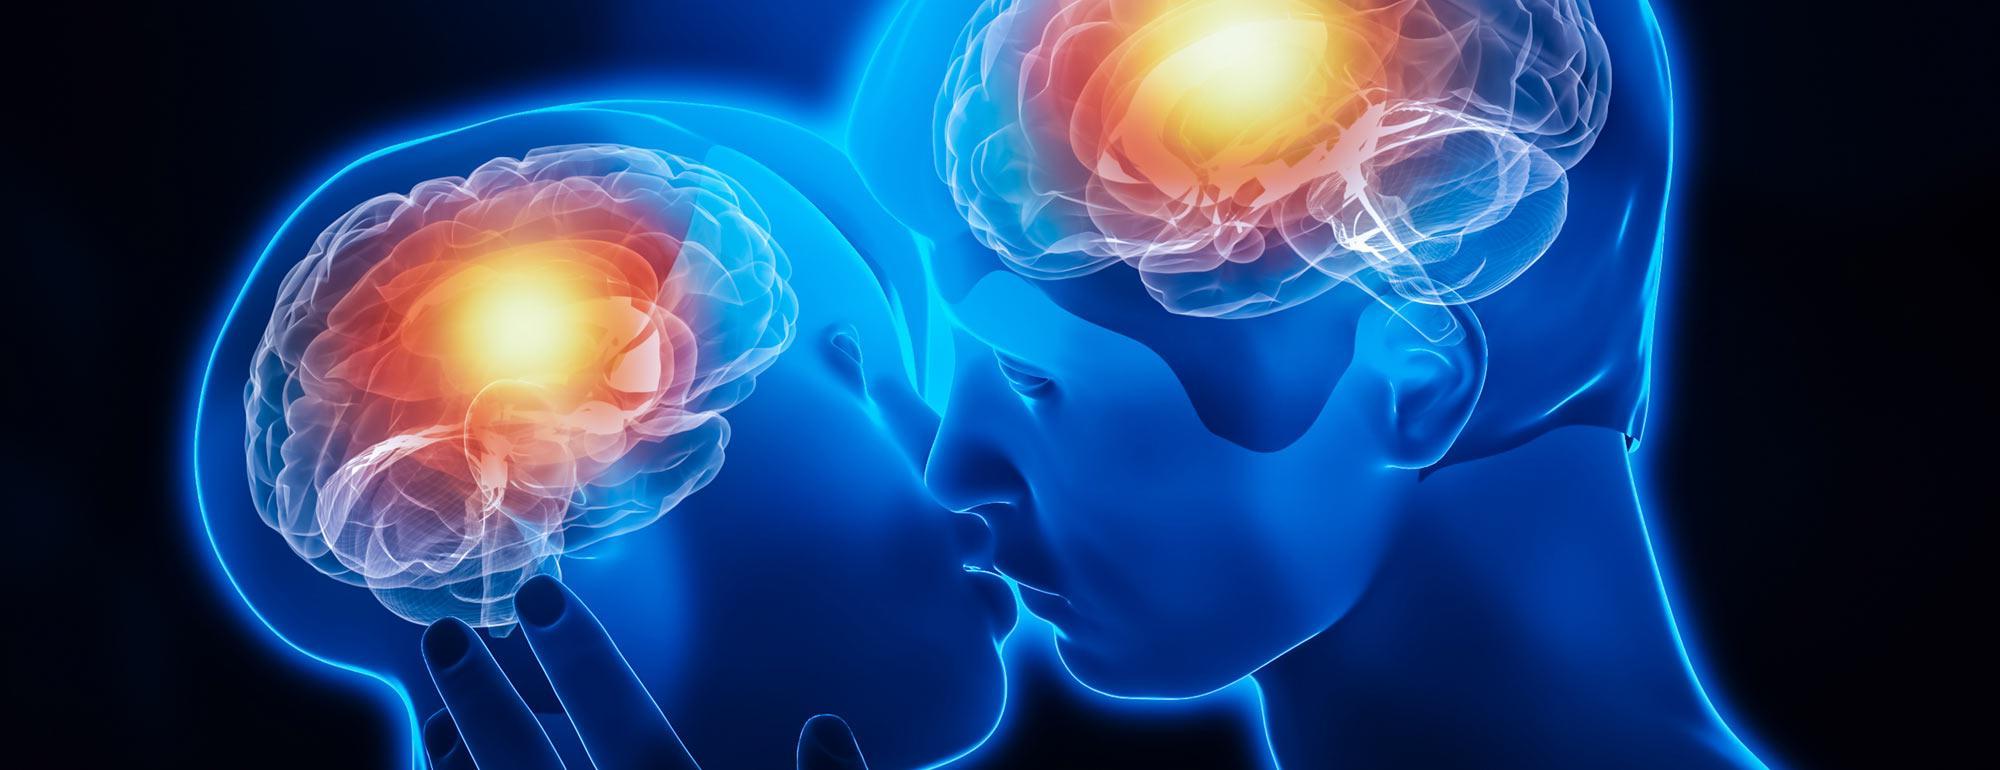 A computer rendering of two people kissing and their brains activating